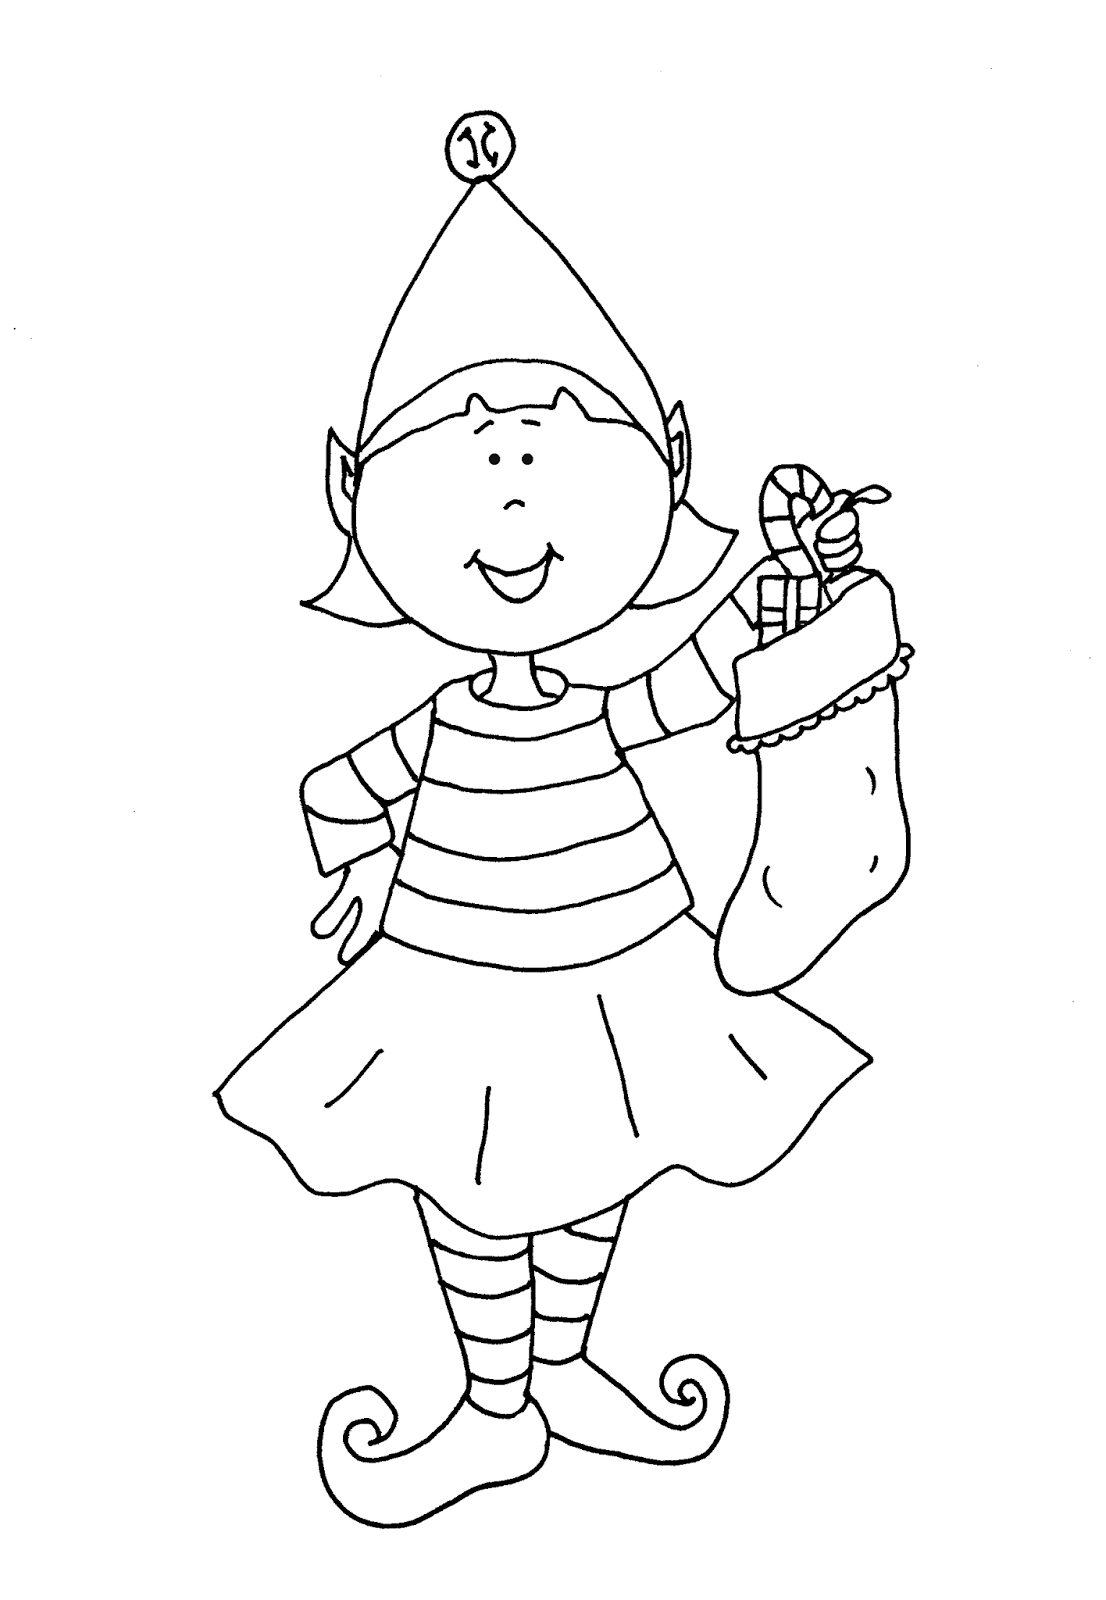 elf-on-the-shelf-free-printable-coloring-pages-at-getcolorings